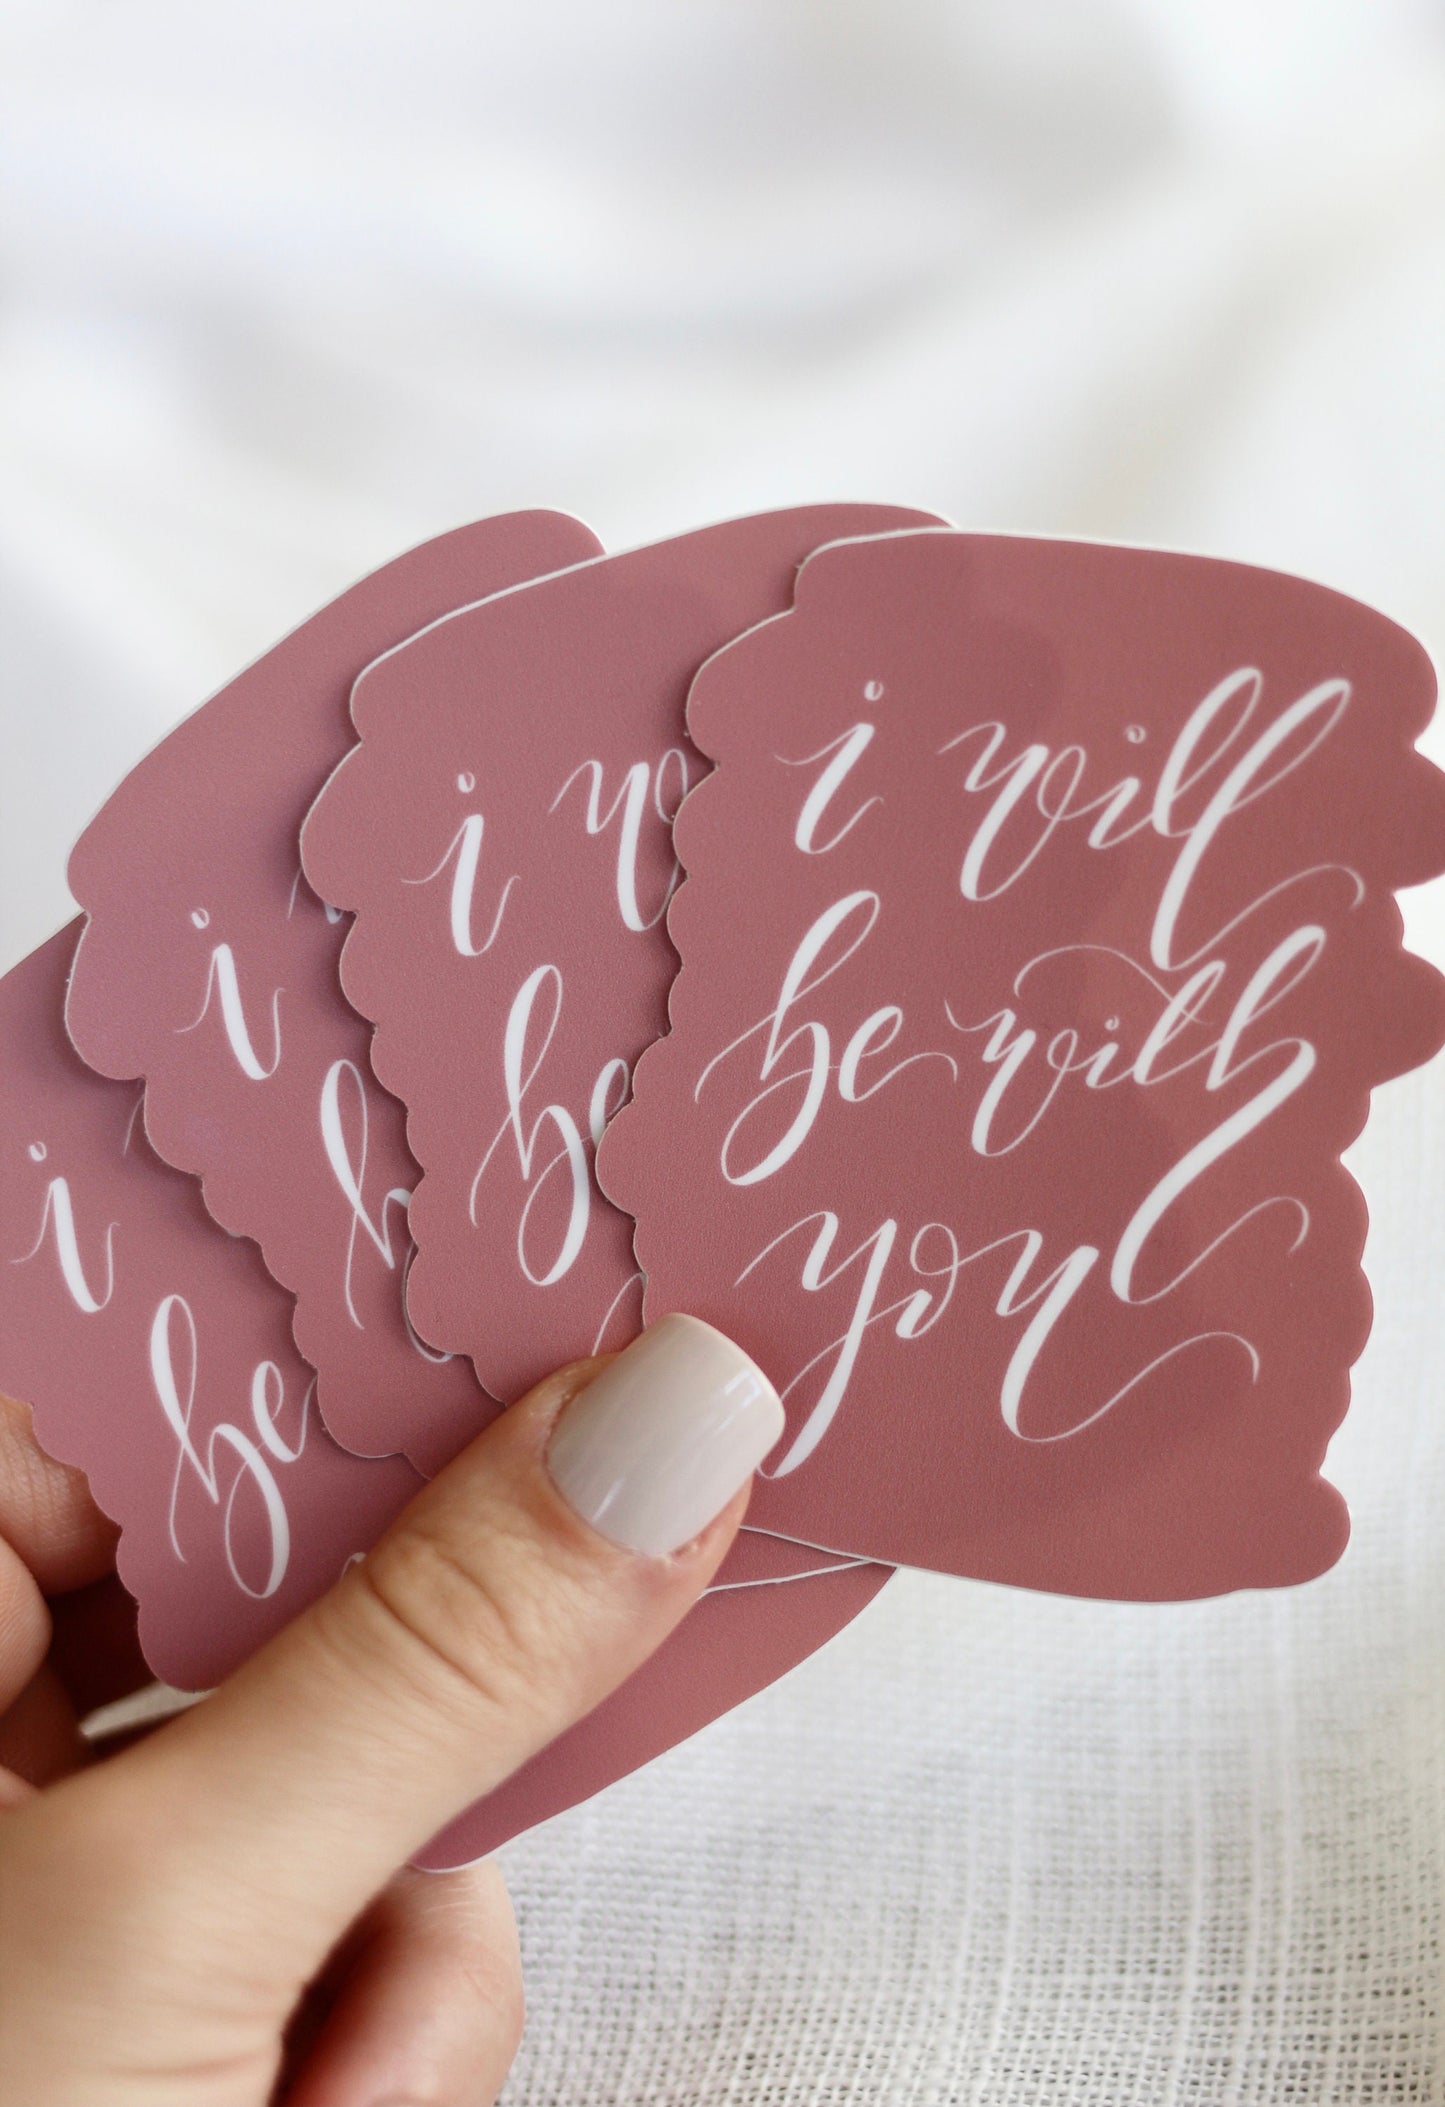 Die Cut Lettered Sticker | "I will be with you" | Elegant Scripture lettering